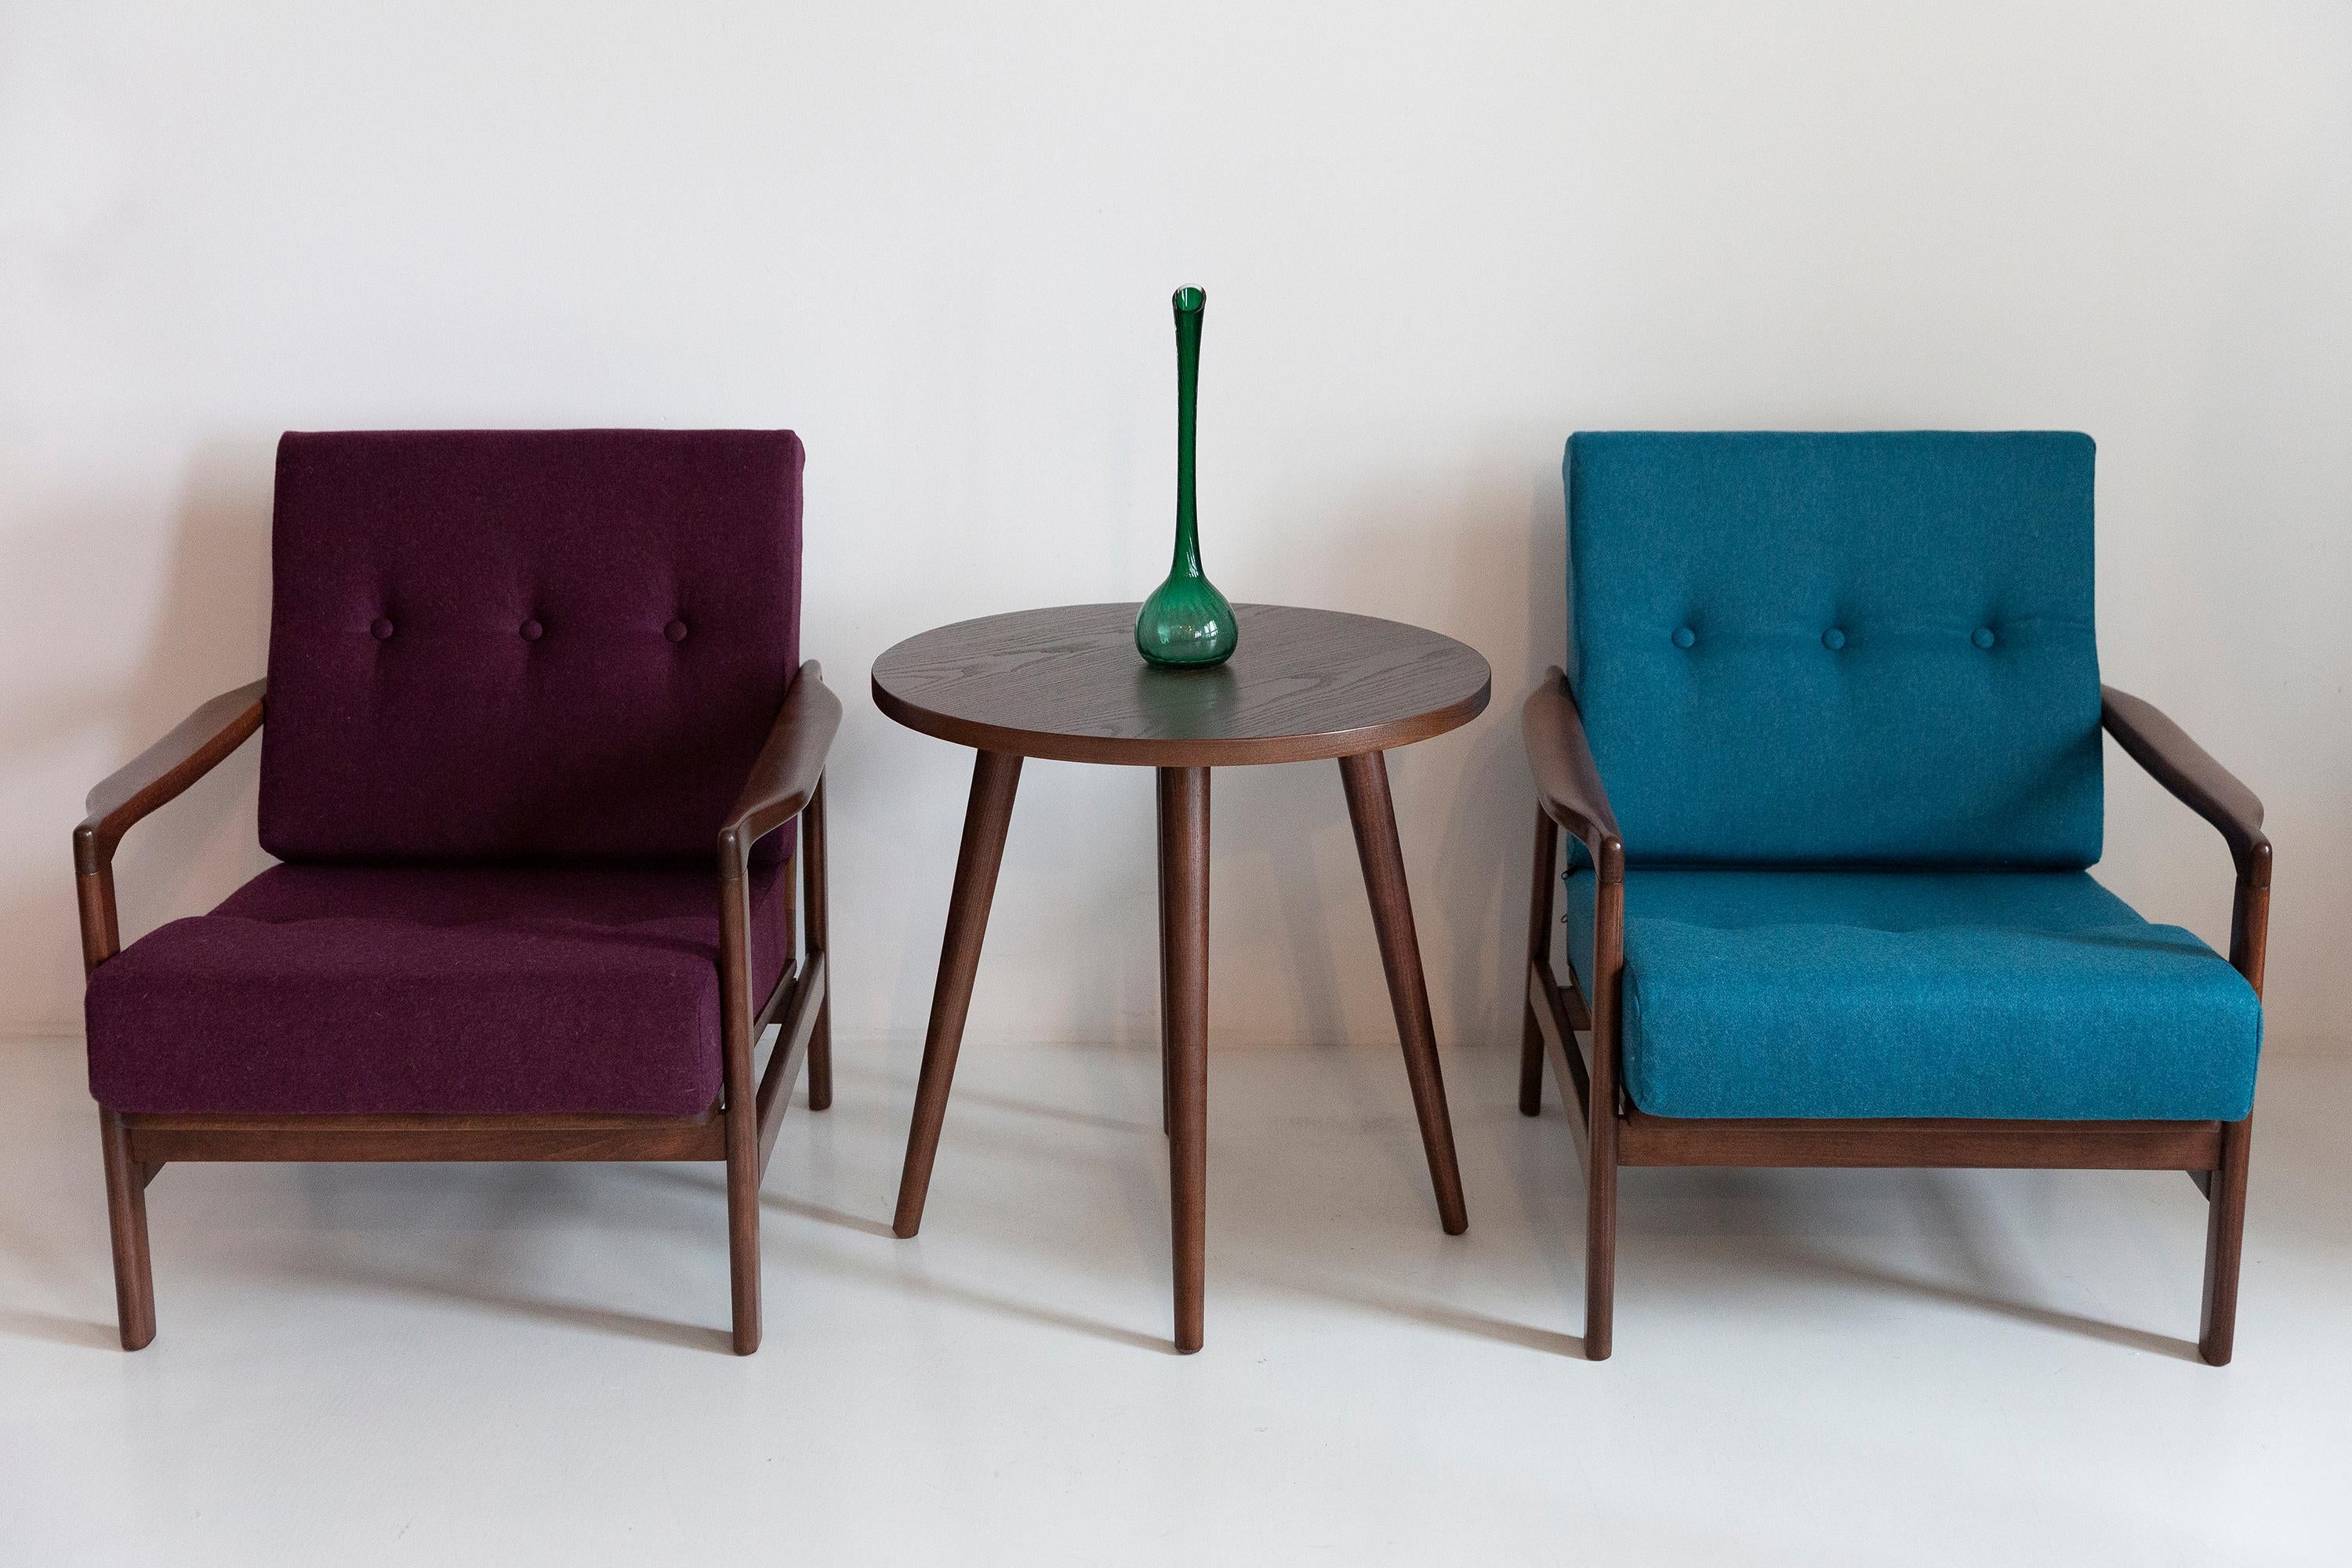 Polish Pair of Mid Century Armchairs and Coffee Table, Zenon Baczyk, Europe, 1960s For Sale